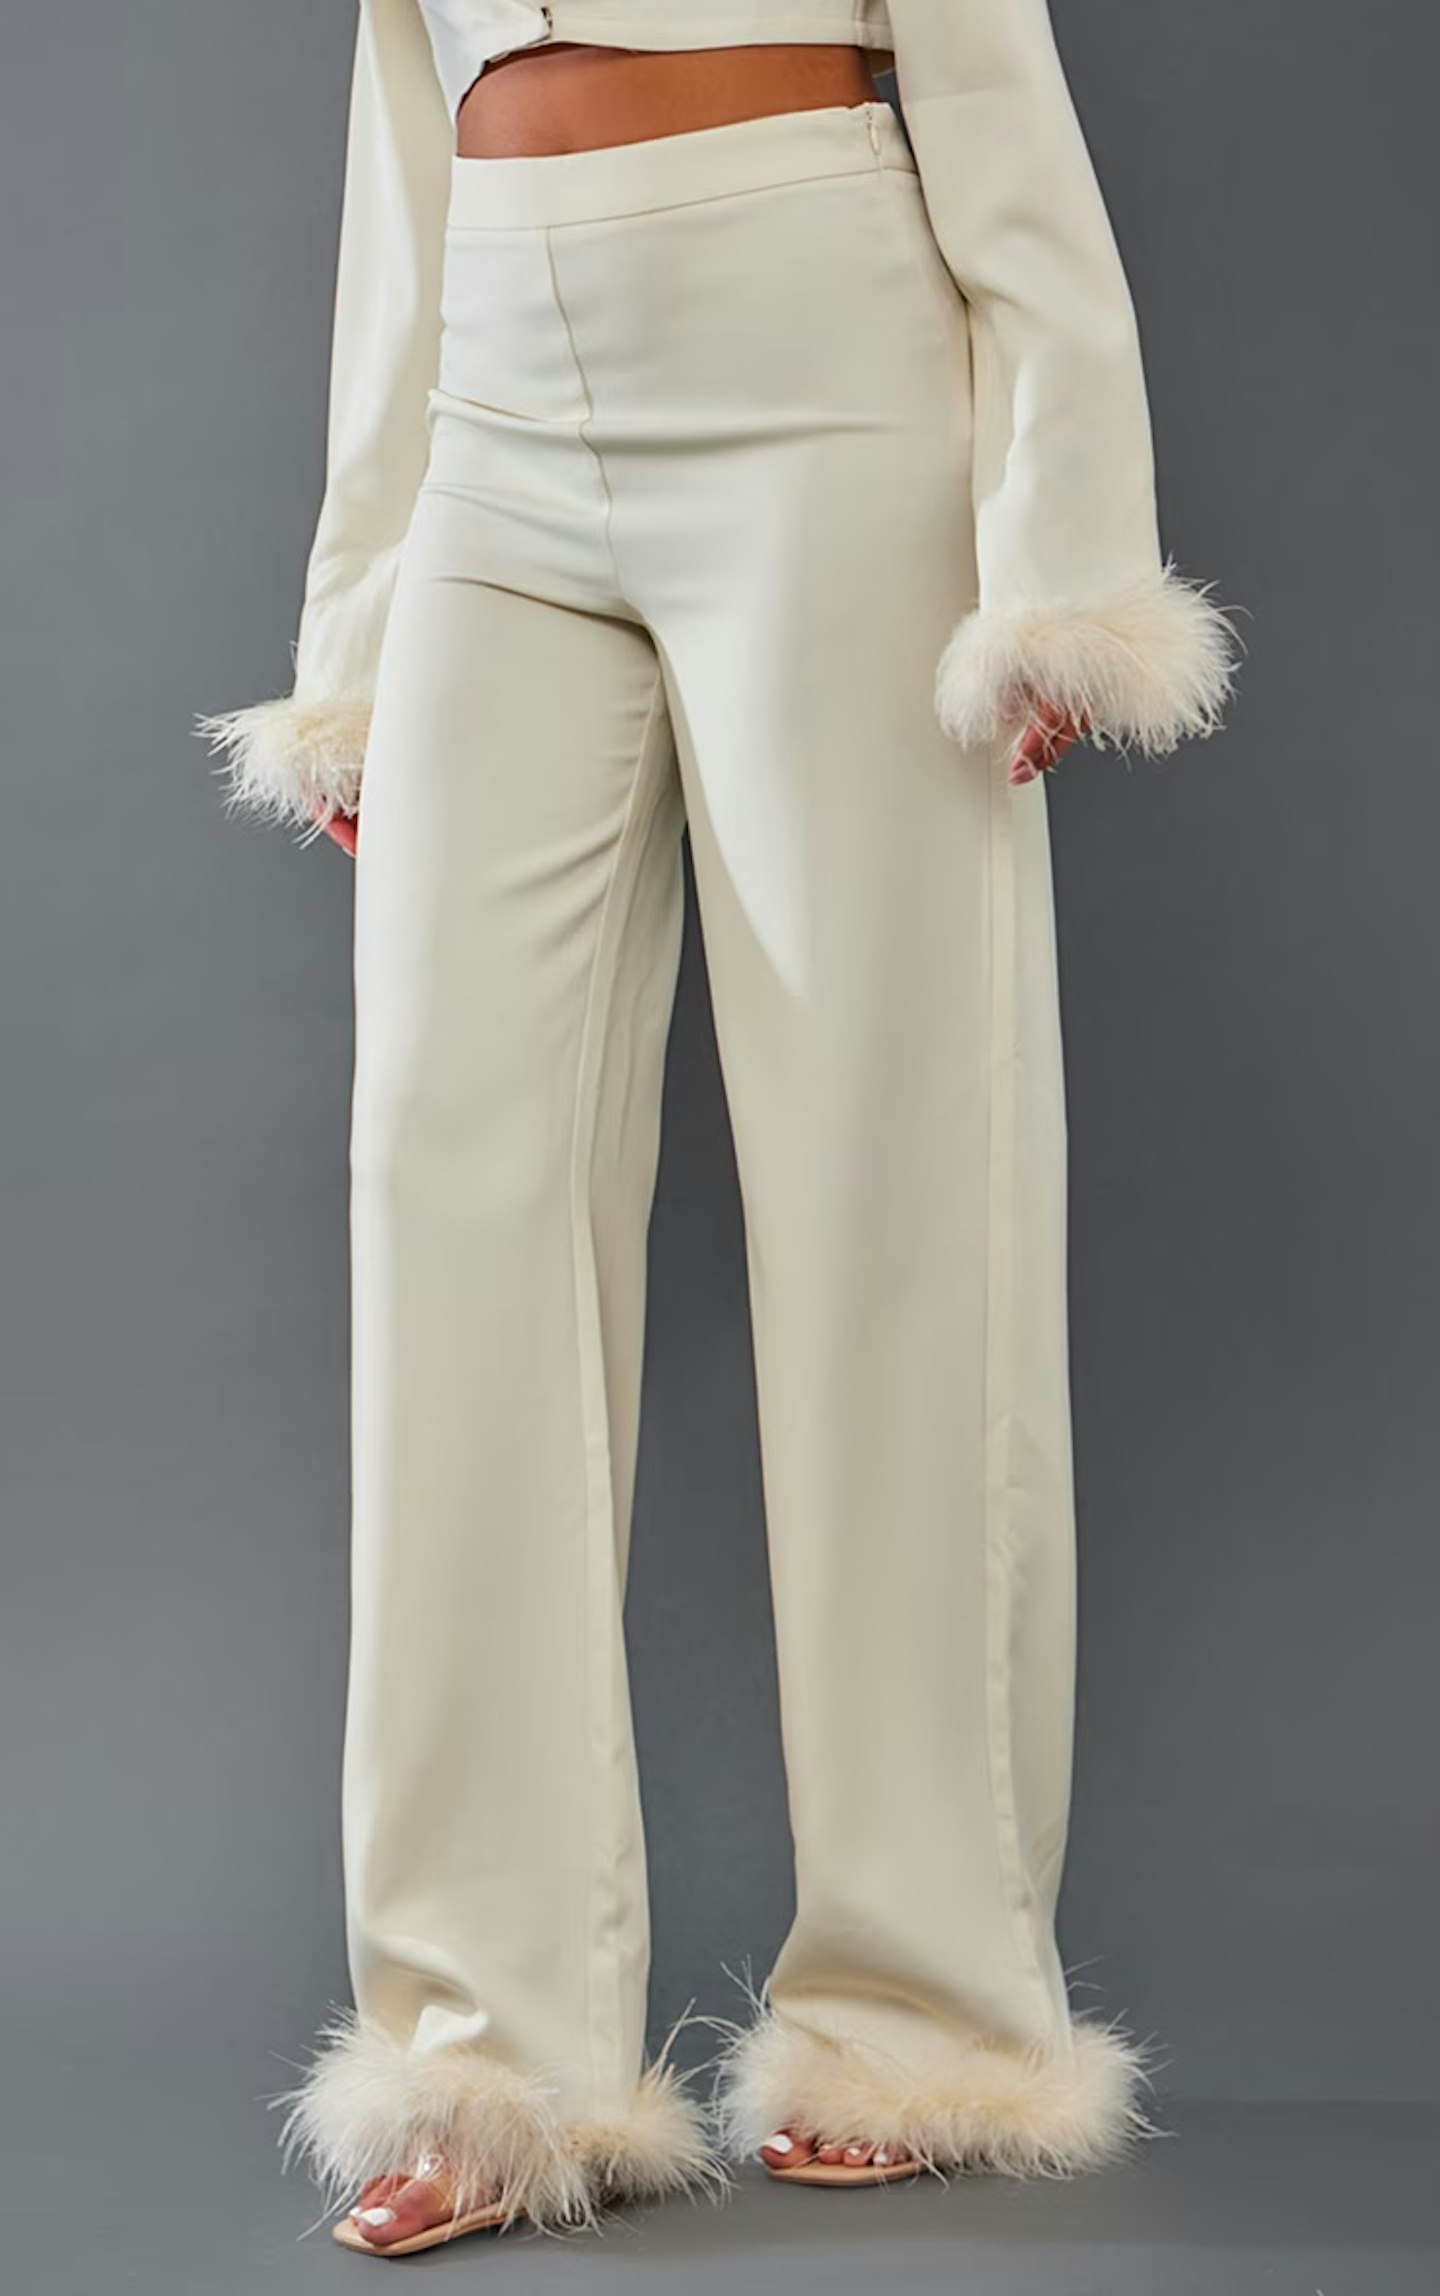 PrettyLittleThing Tall Cream Faux Feather Trim Trousers